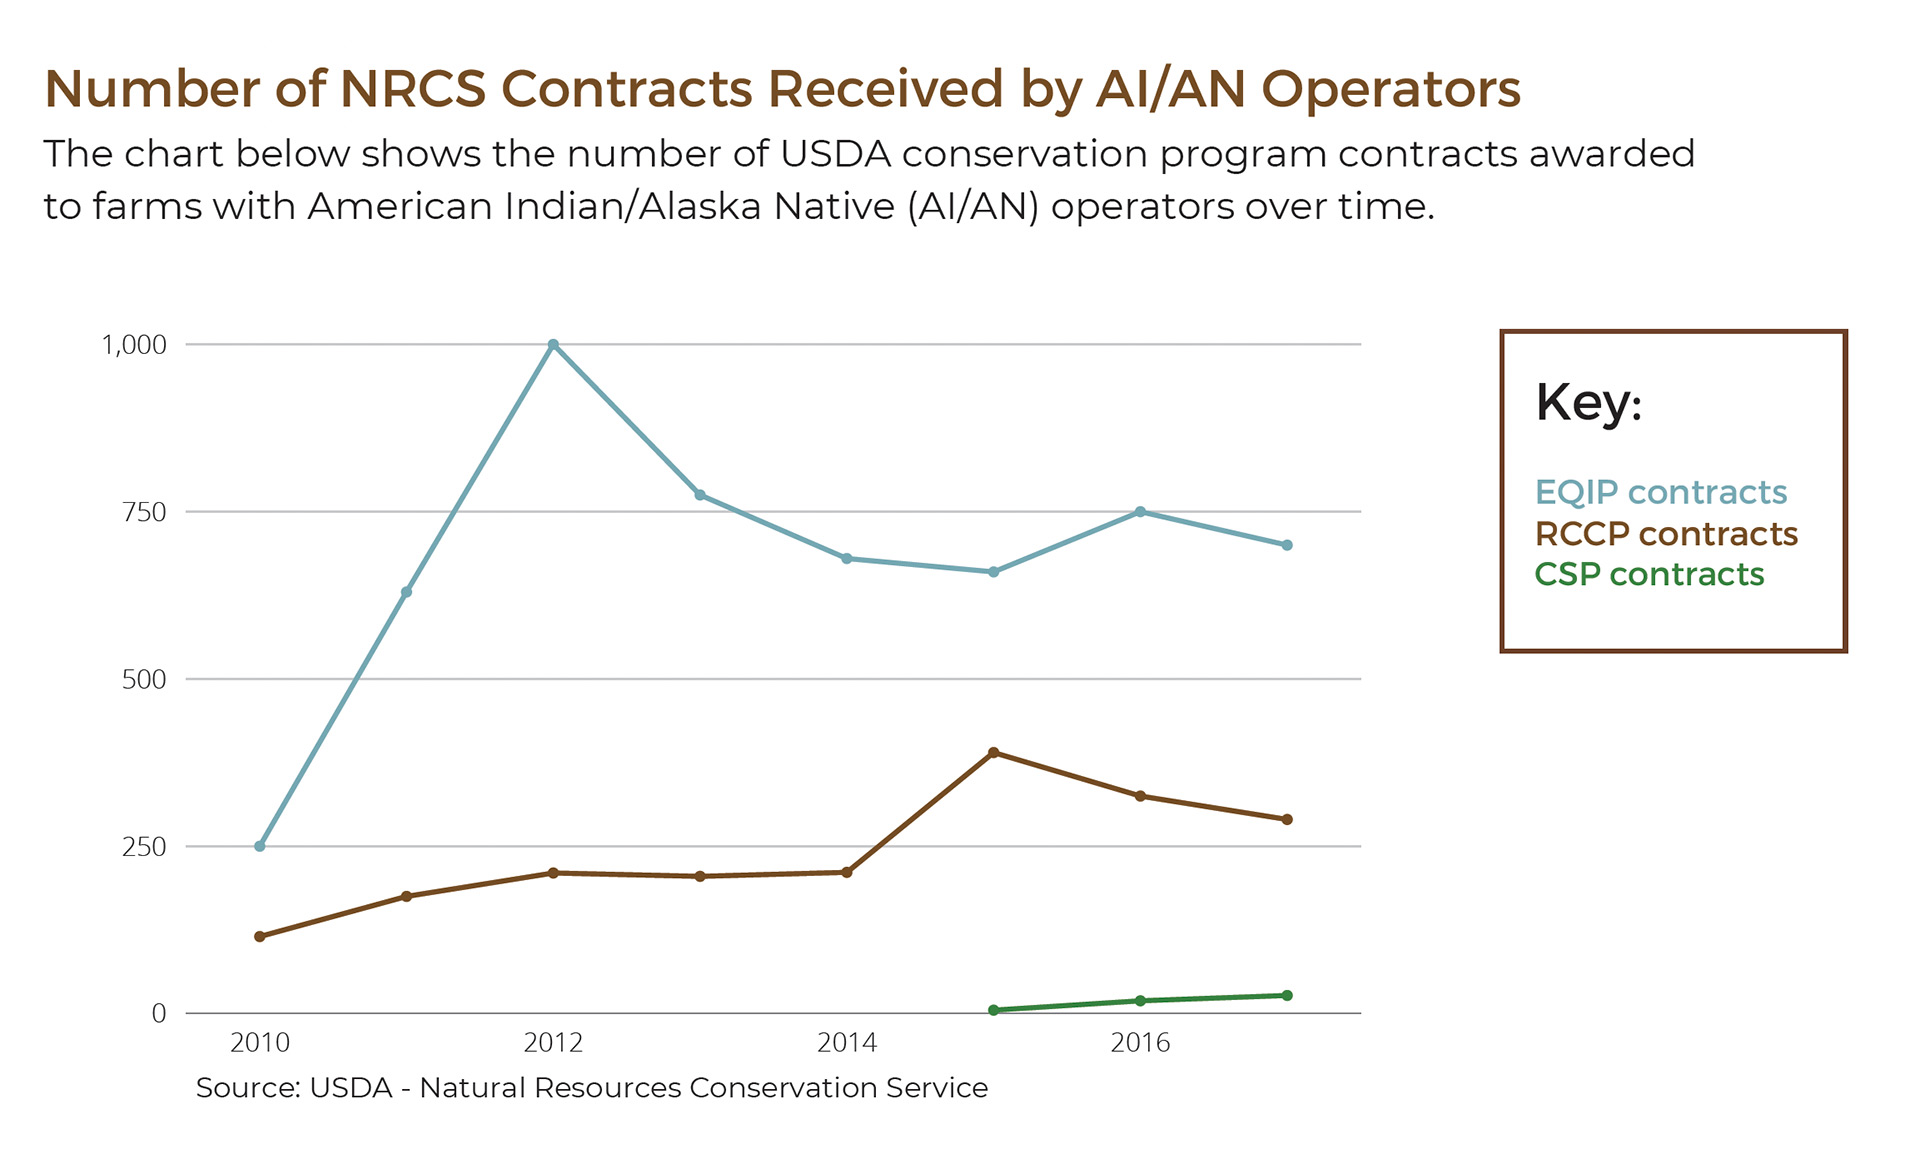 Number of NRCS Contracts Received by AI/AN Operators